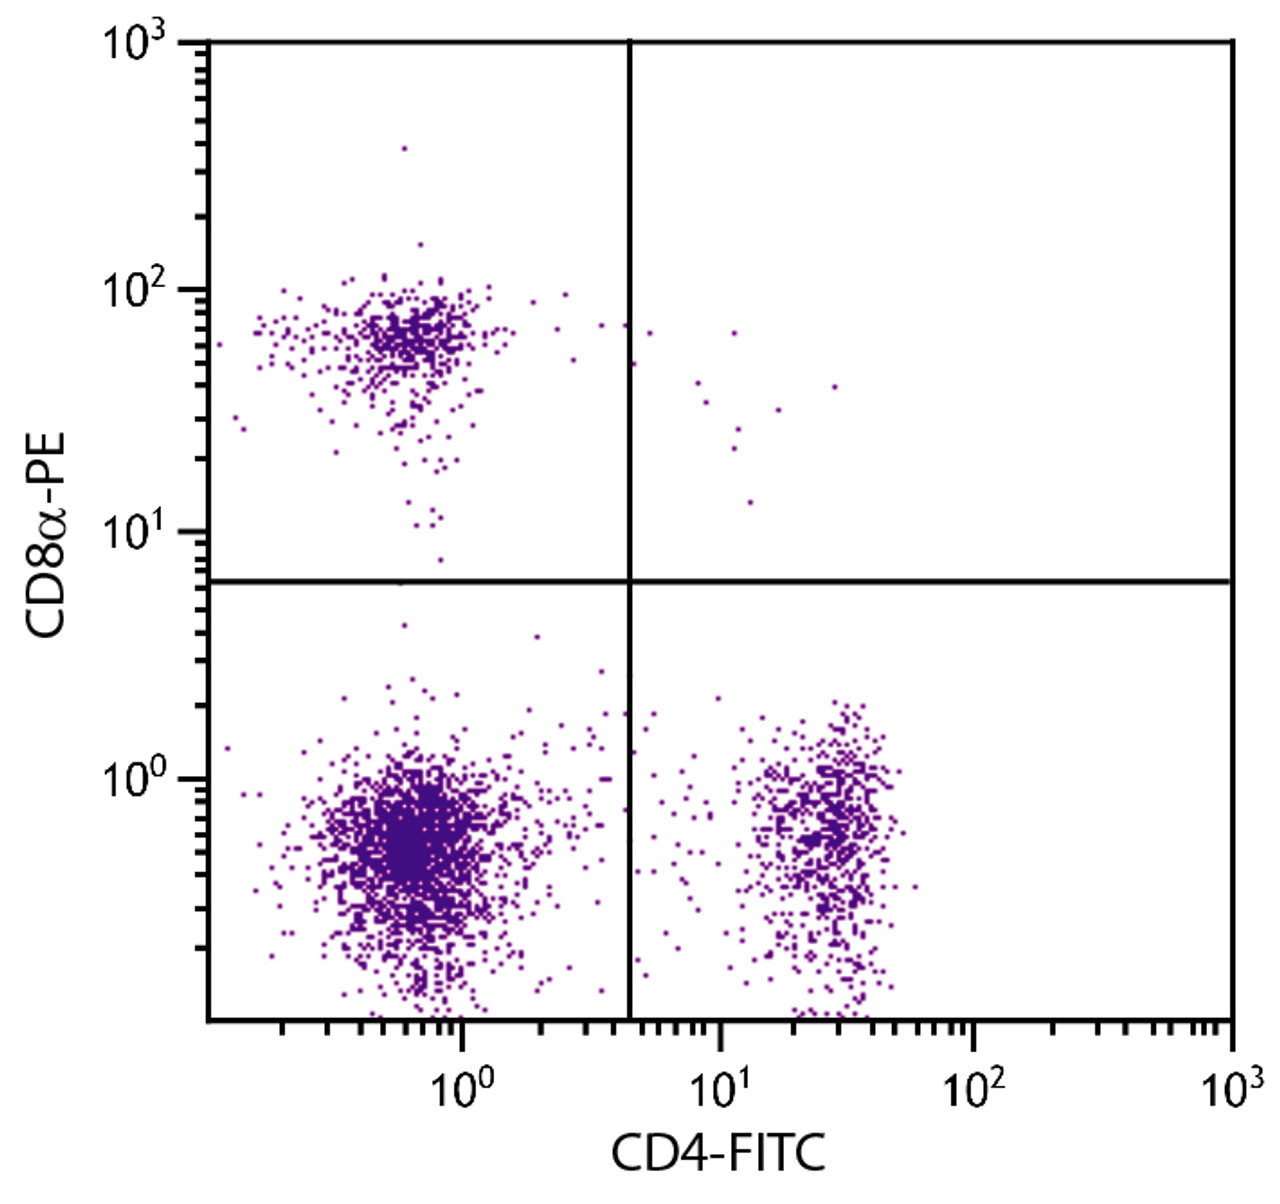 BALB/c mouse splenocytes were stained with Rat Anti-Mouse CD4-FITC (Cat. No98-584) and Rat Anti-Mouse CD8?-PE .